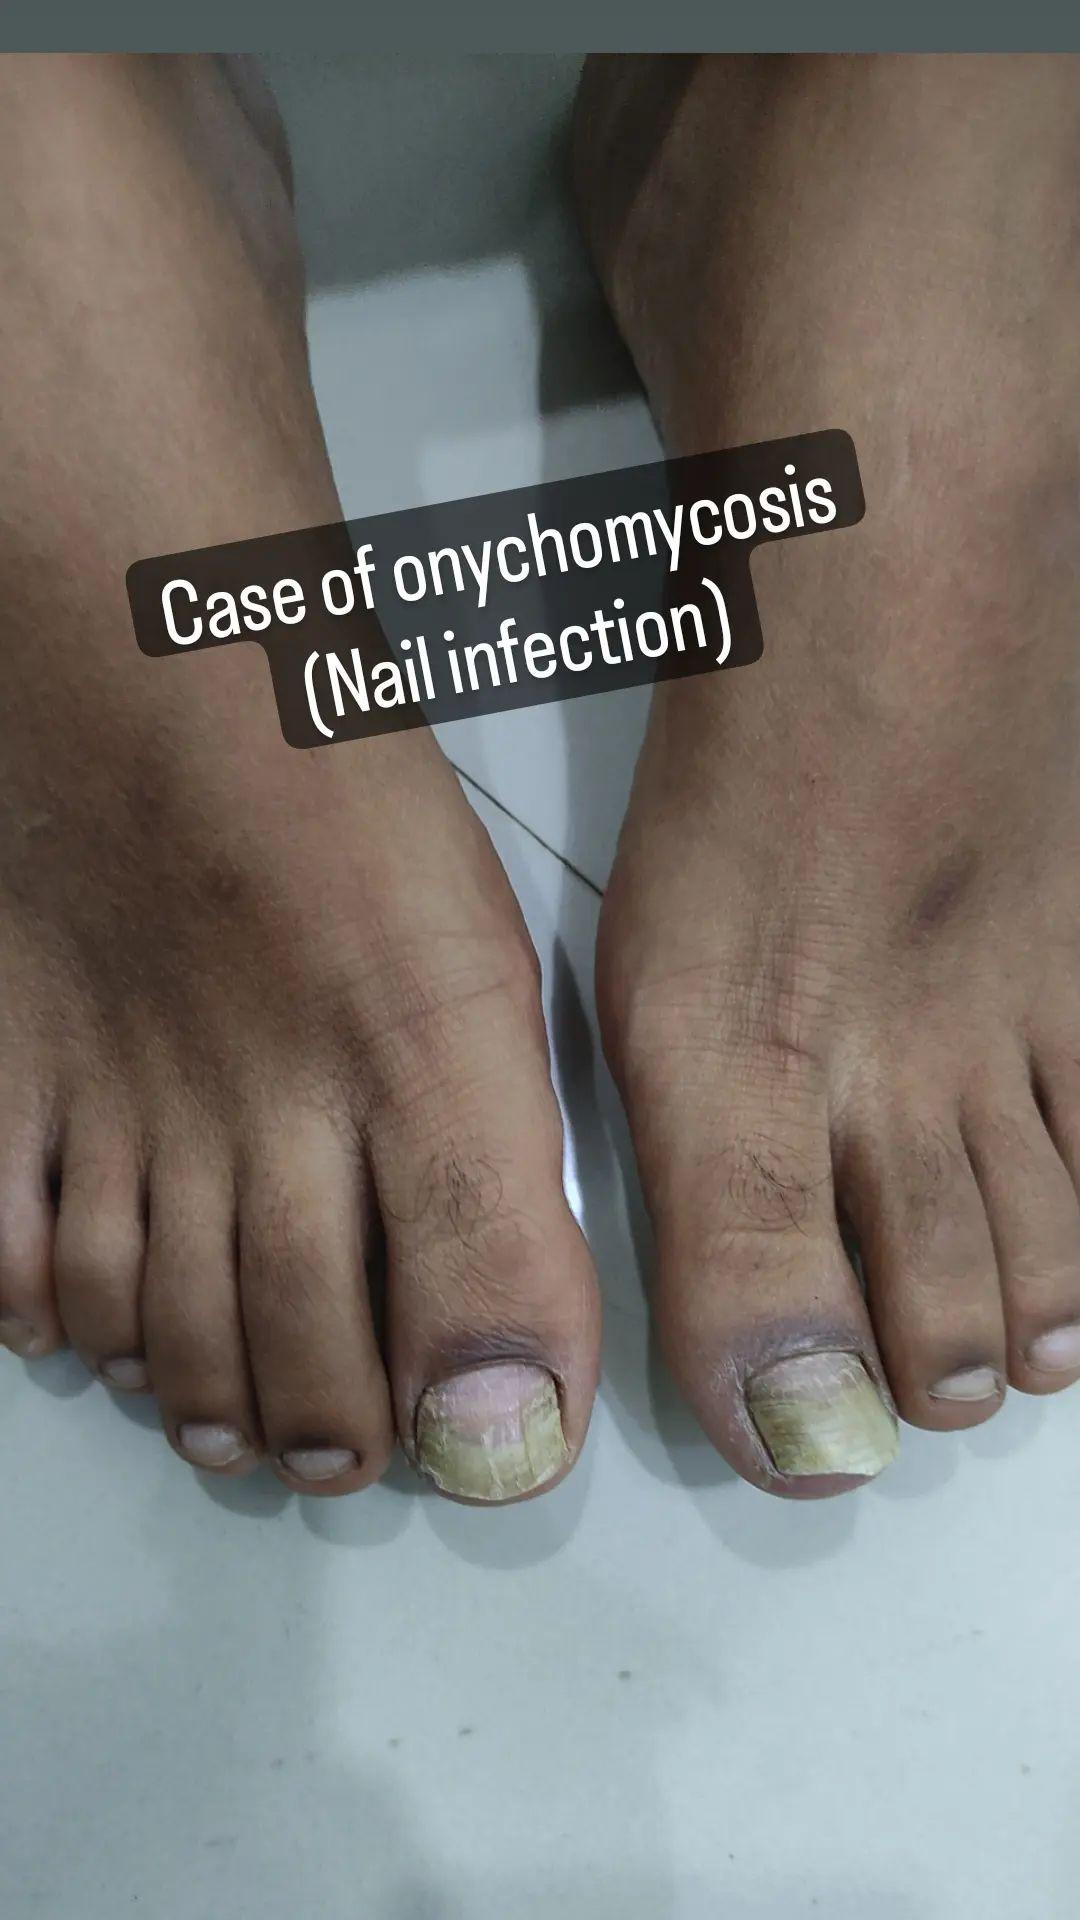 Fungal Infections Cause, Symptoms and Ayurvedic Treatments - Dr. Sharda  Ayurveda